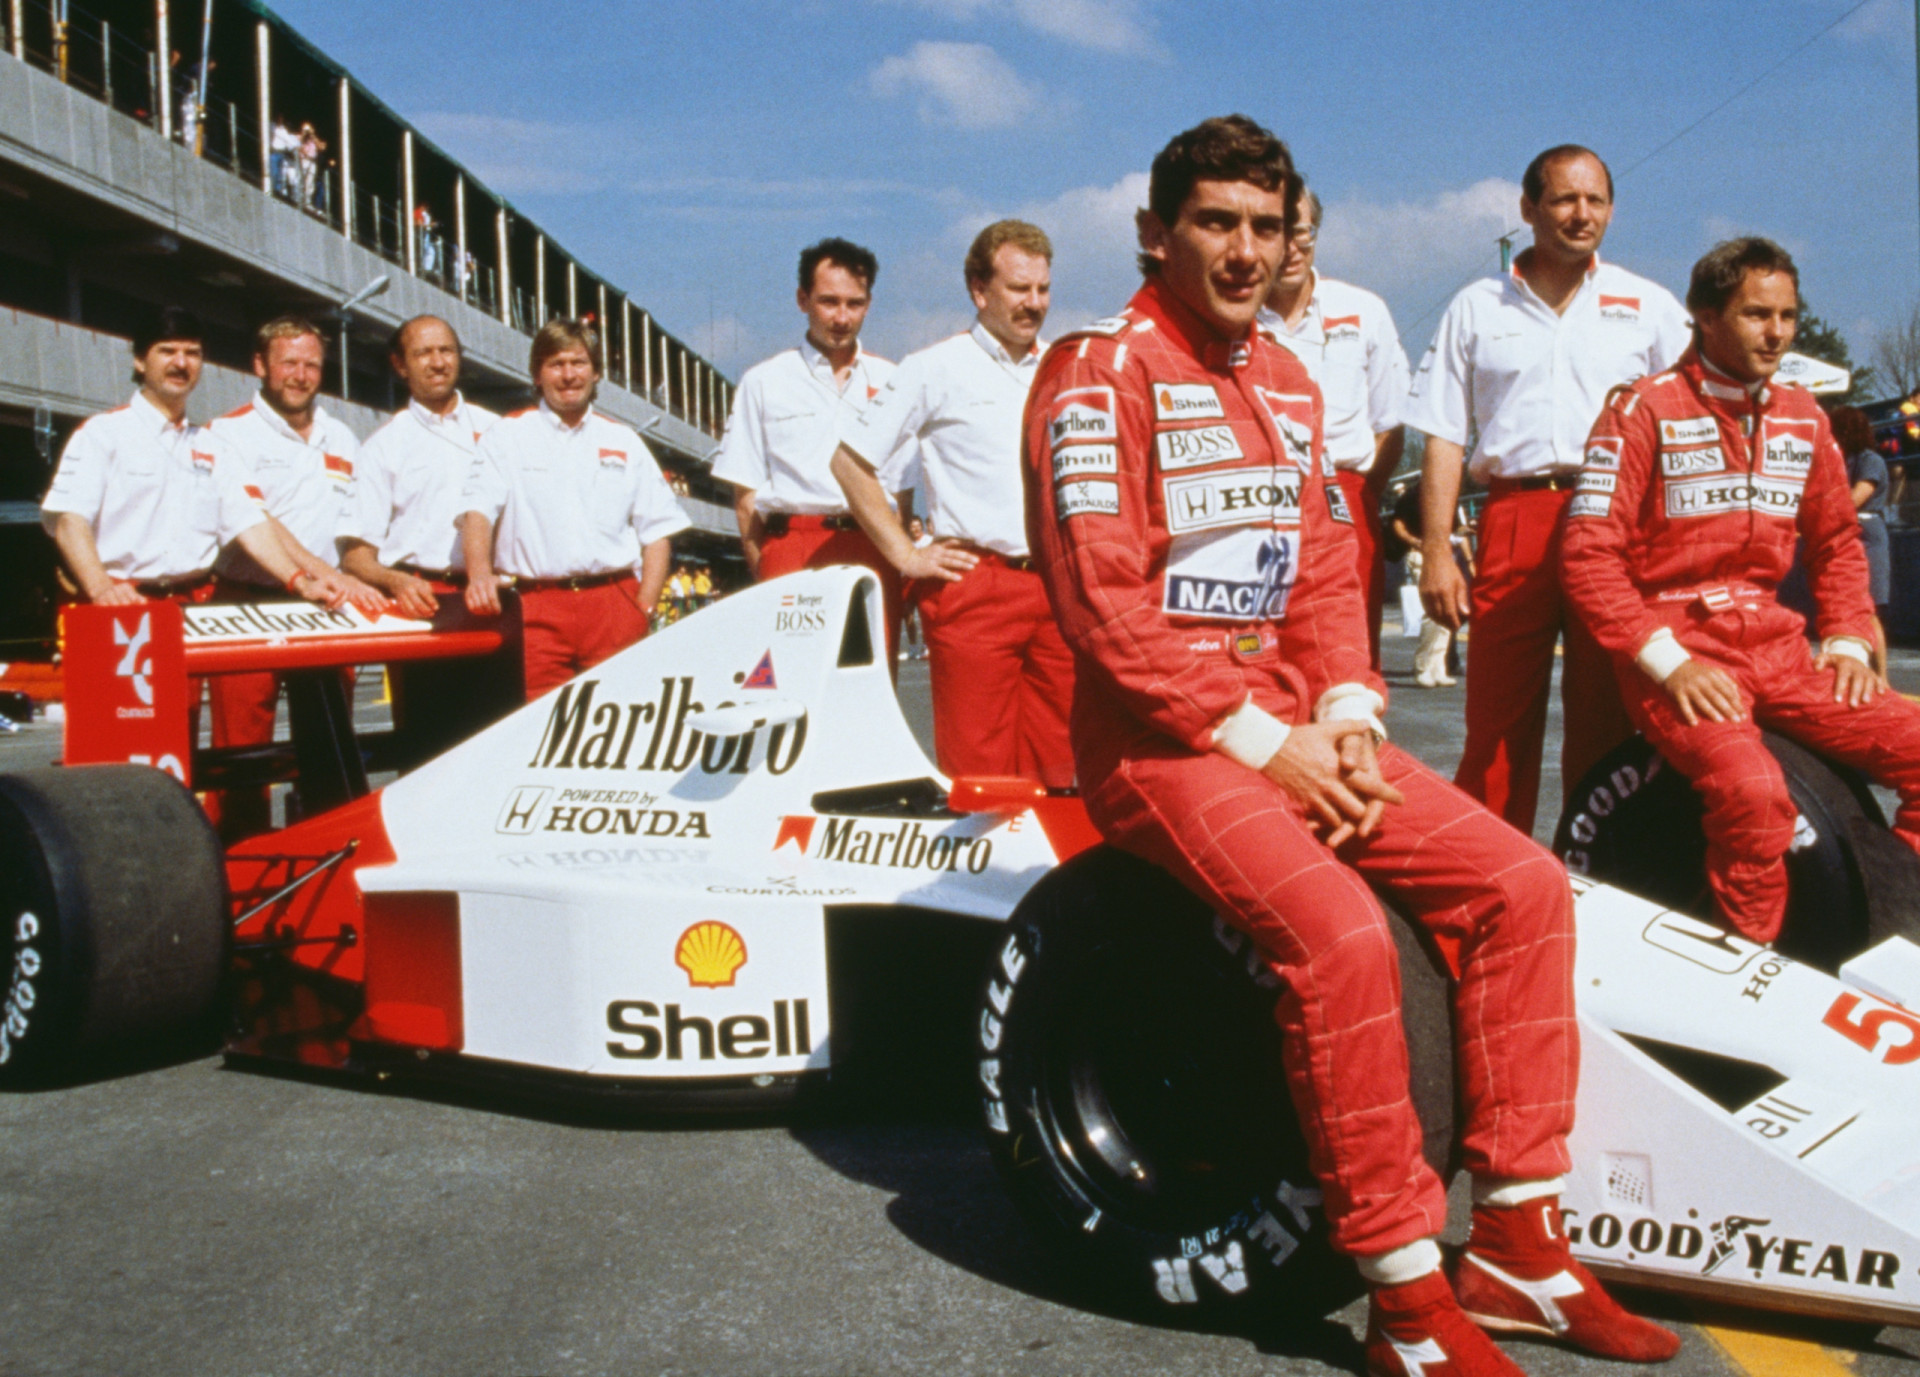 <p>Senna, seen here with teammate Gerhard Berger and the McLaren team, won seven of the 16 races; his main challenger for the title was Nigel Mansell. Prost, meanwhile, failed to win a race with Ferrari.</p><p>You may also like:<a href="https://www.starsinsider.com/n/464732?utm_source=msn.com&utm_medium=display&utm_campaign=referral_description&utm_content=703485en-us"> What a vasectomy is exactly, and why it might be a good idea</a></p>